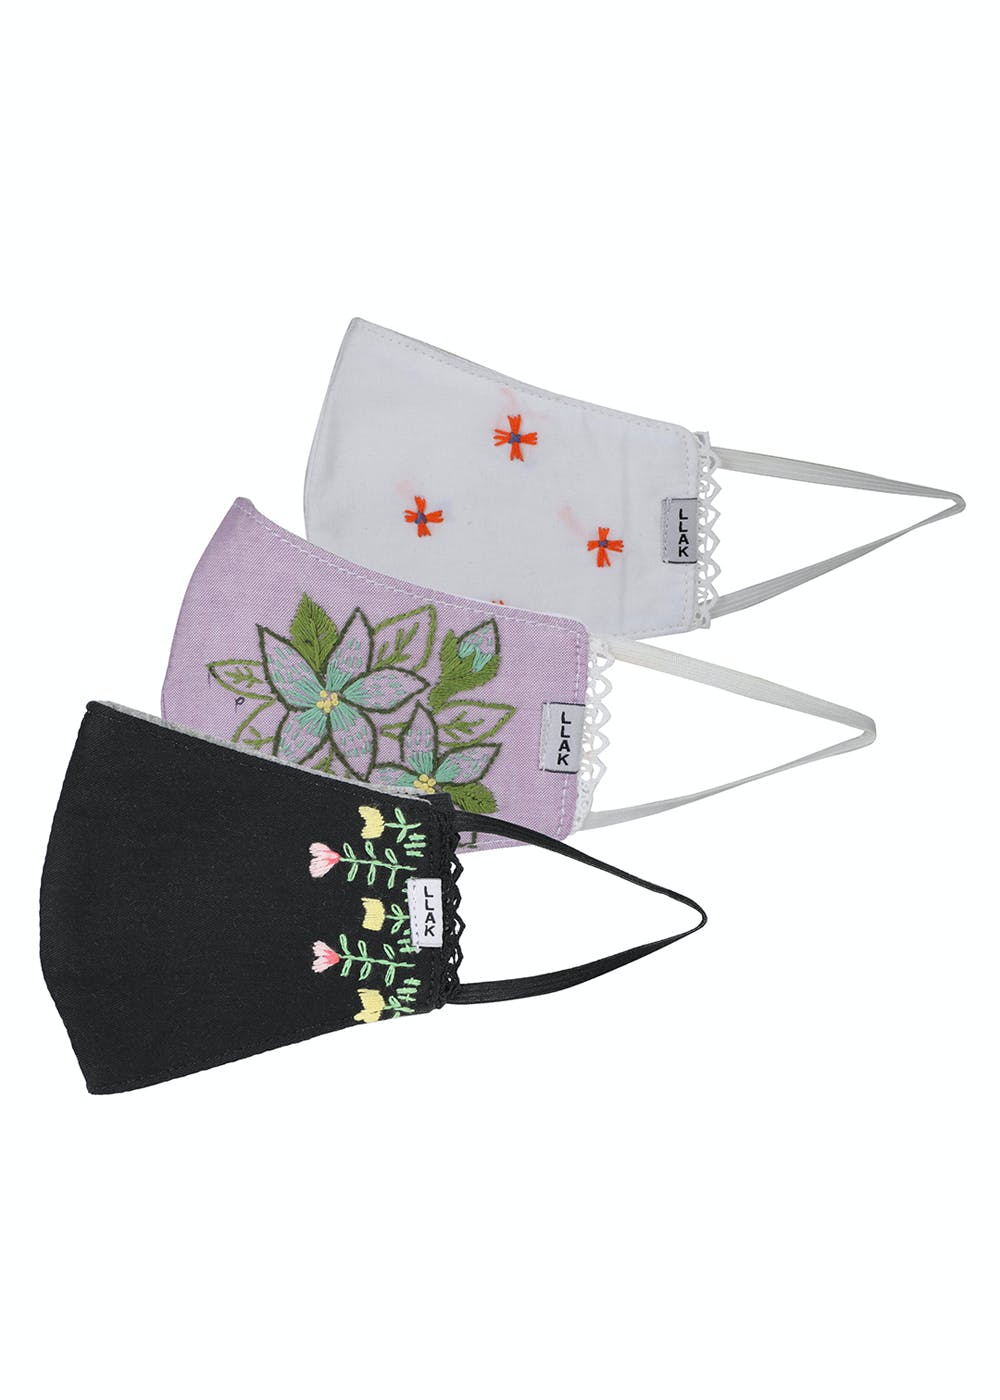 Pack of 3 Floral Embroidered Masks- Black, White & Lilac